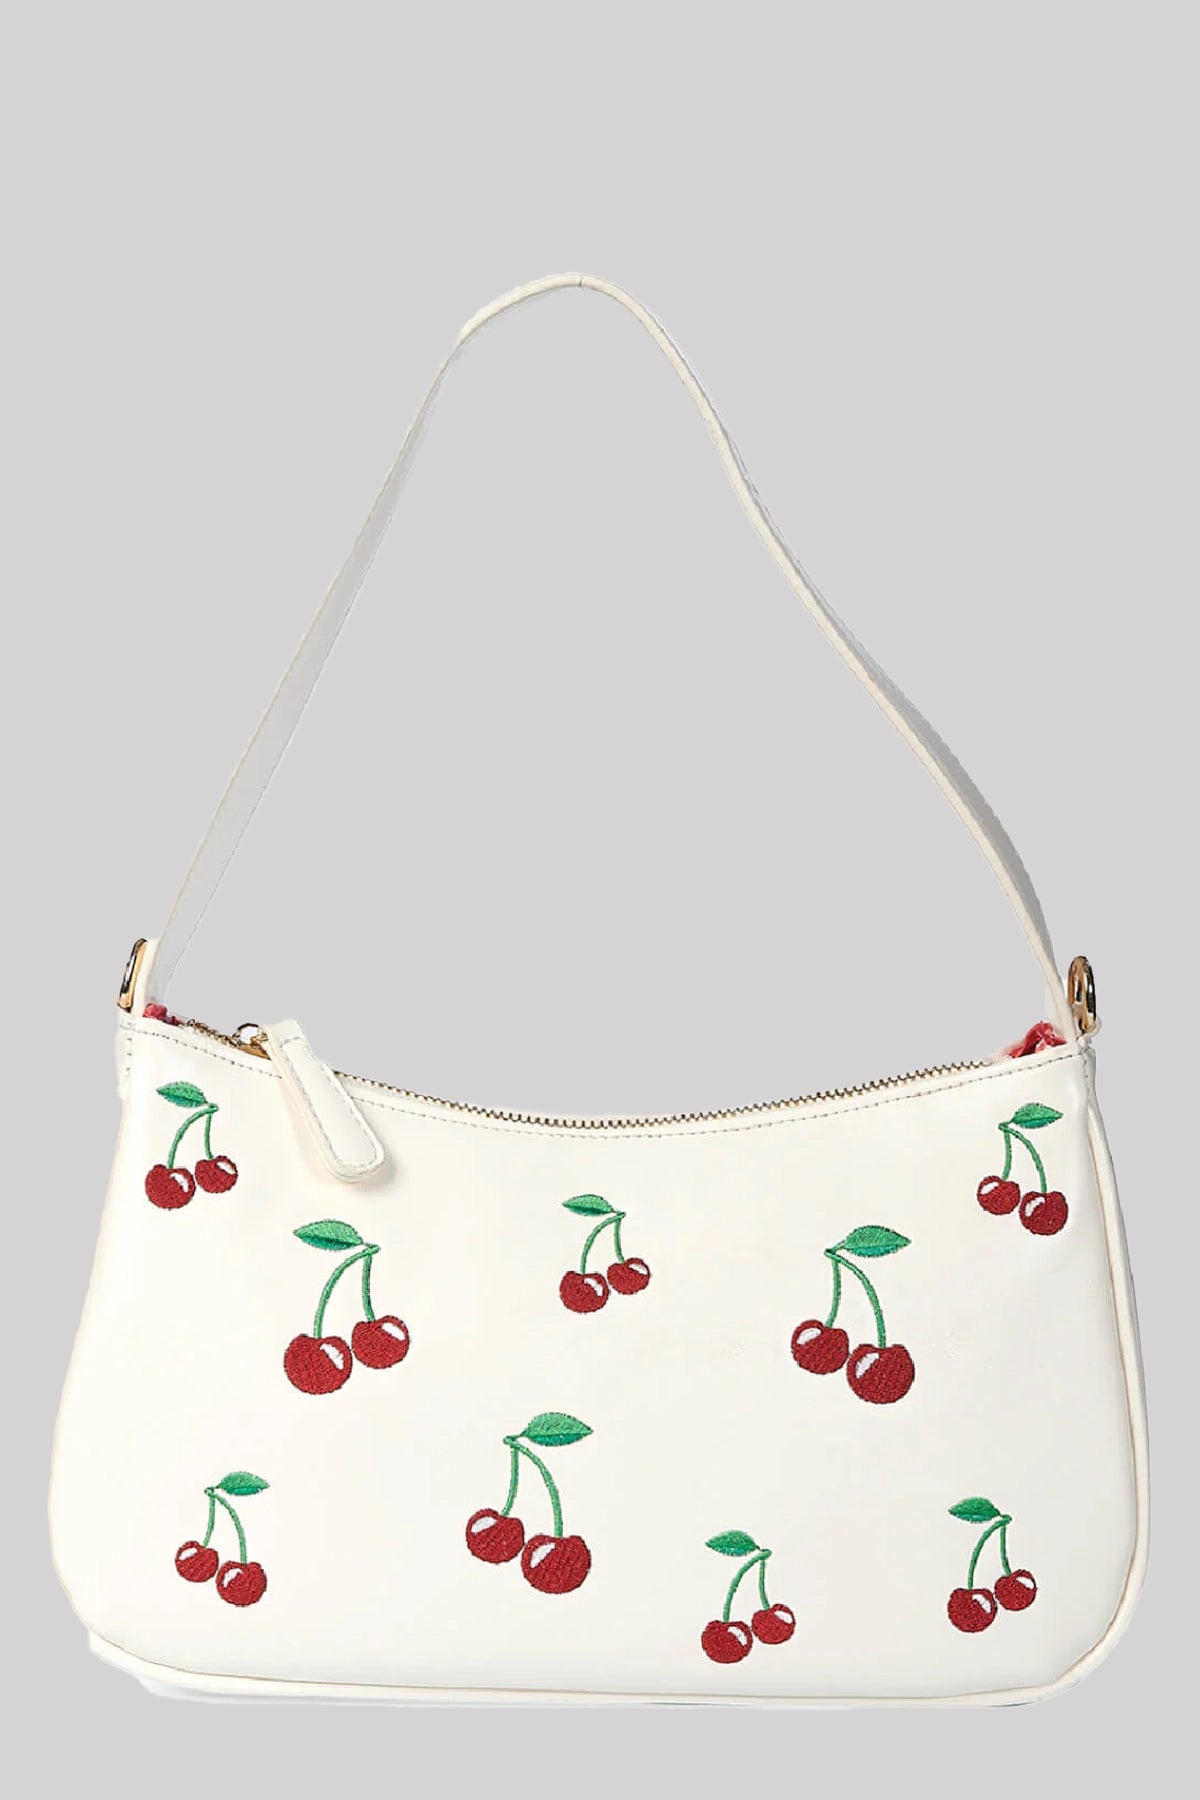 Banned Wild Cherry Embroidered Shoulder Bag, White, One-Size